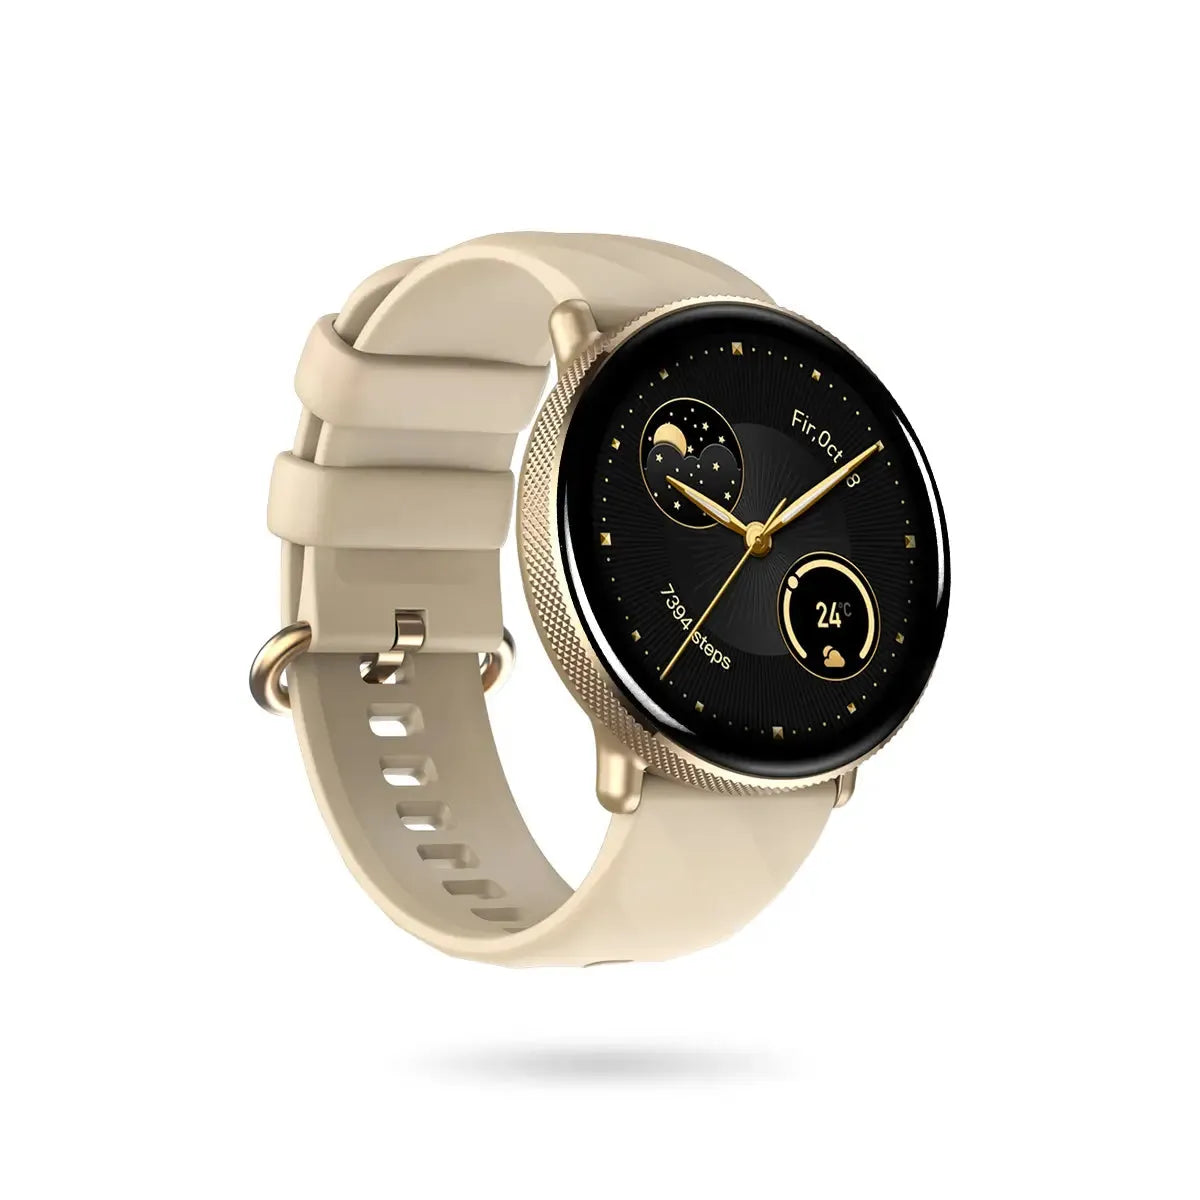 Tousains smartwatch P2 in gold